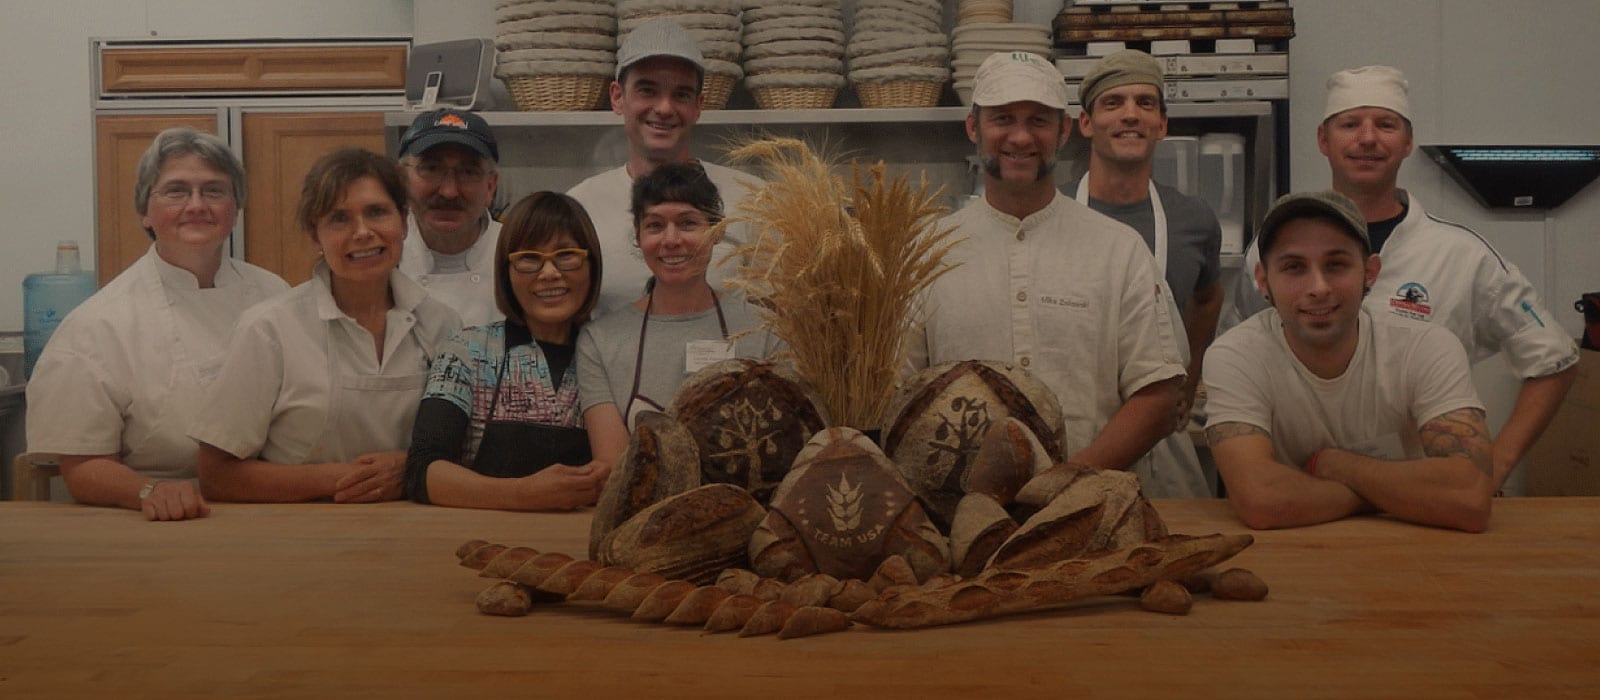 Central Milling Bakers and Team